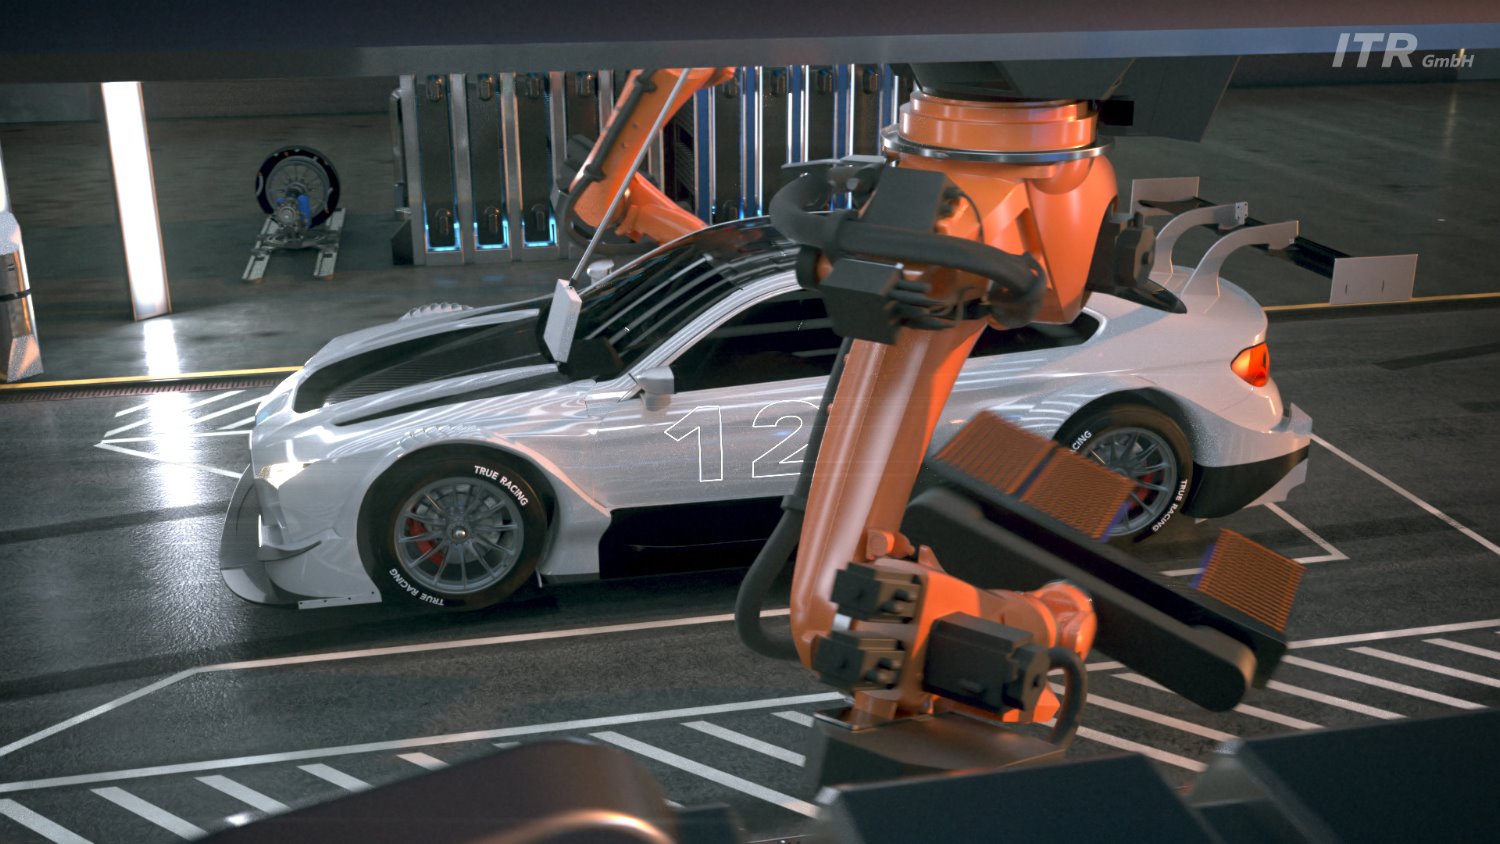 Industrial robots will effortlessly remove and replace the car’s underbody battery pack during the mandatory pit-stops